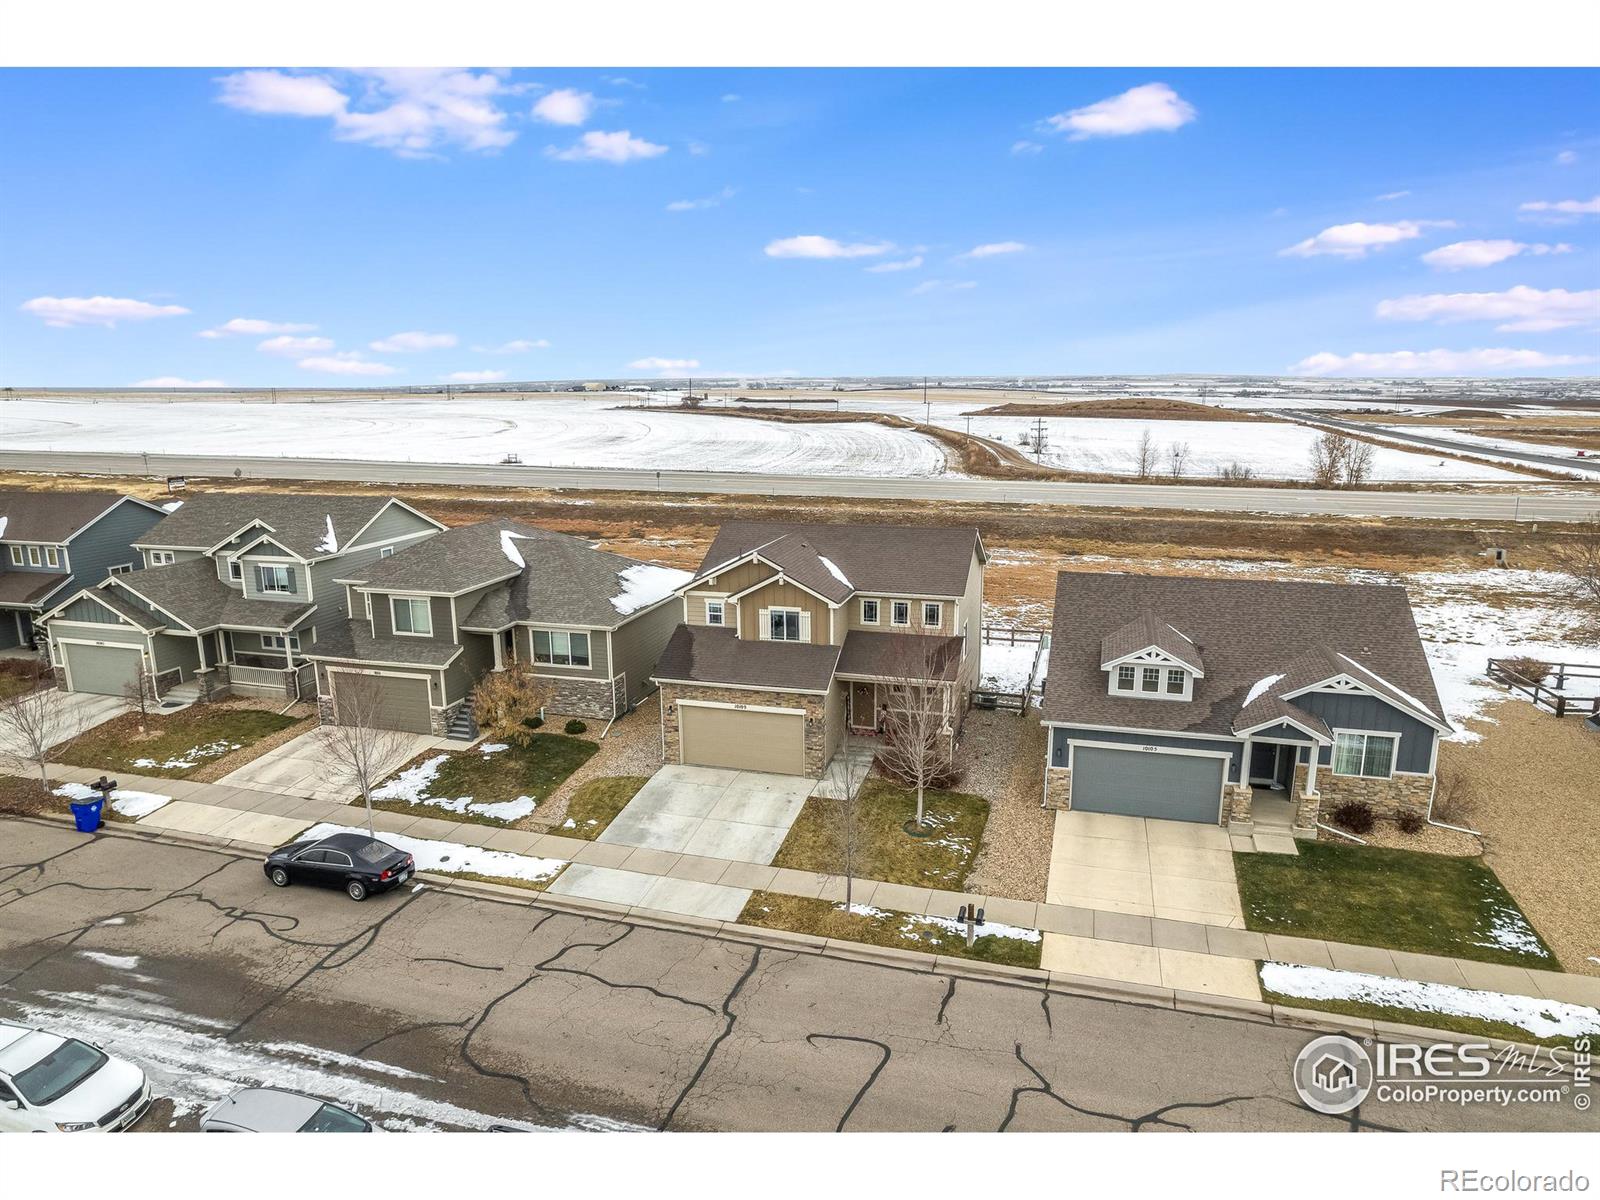 Report Image for 10109 W 11th Street,Greeley, Colorado